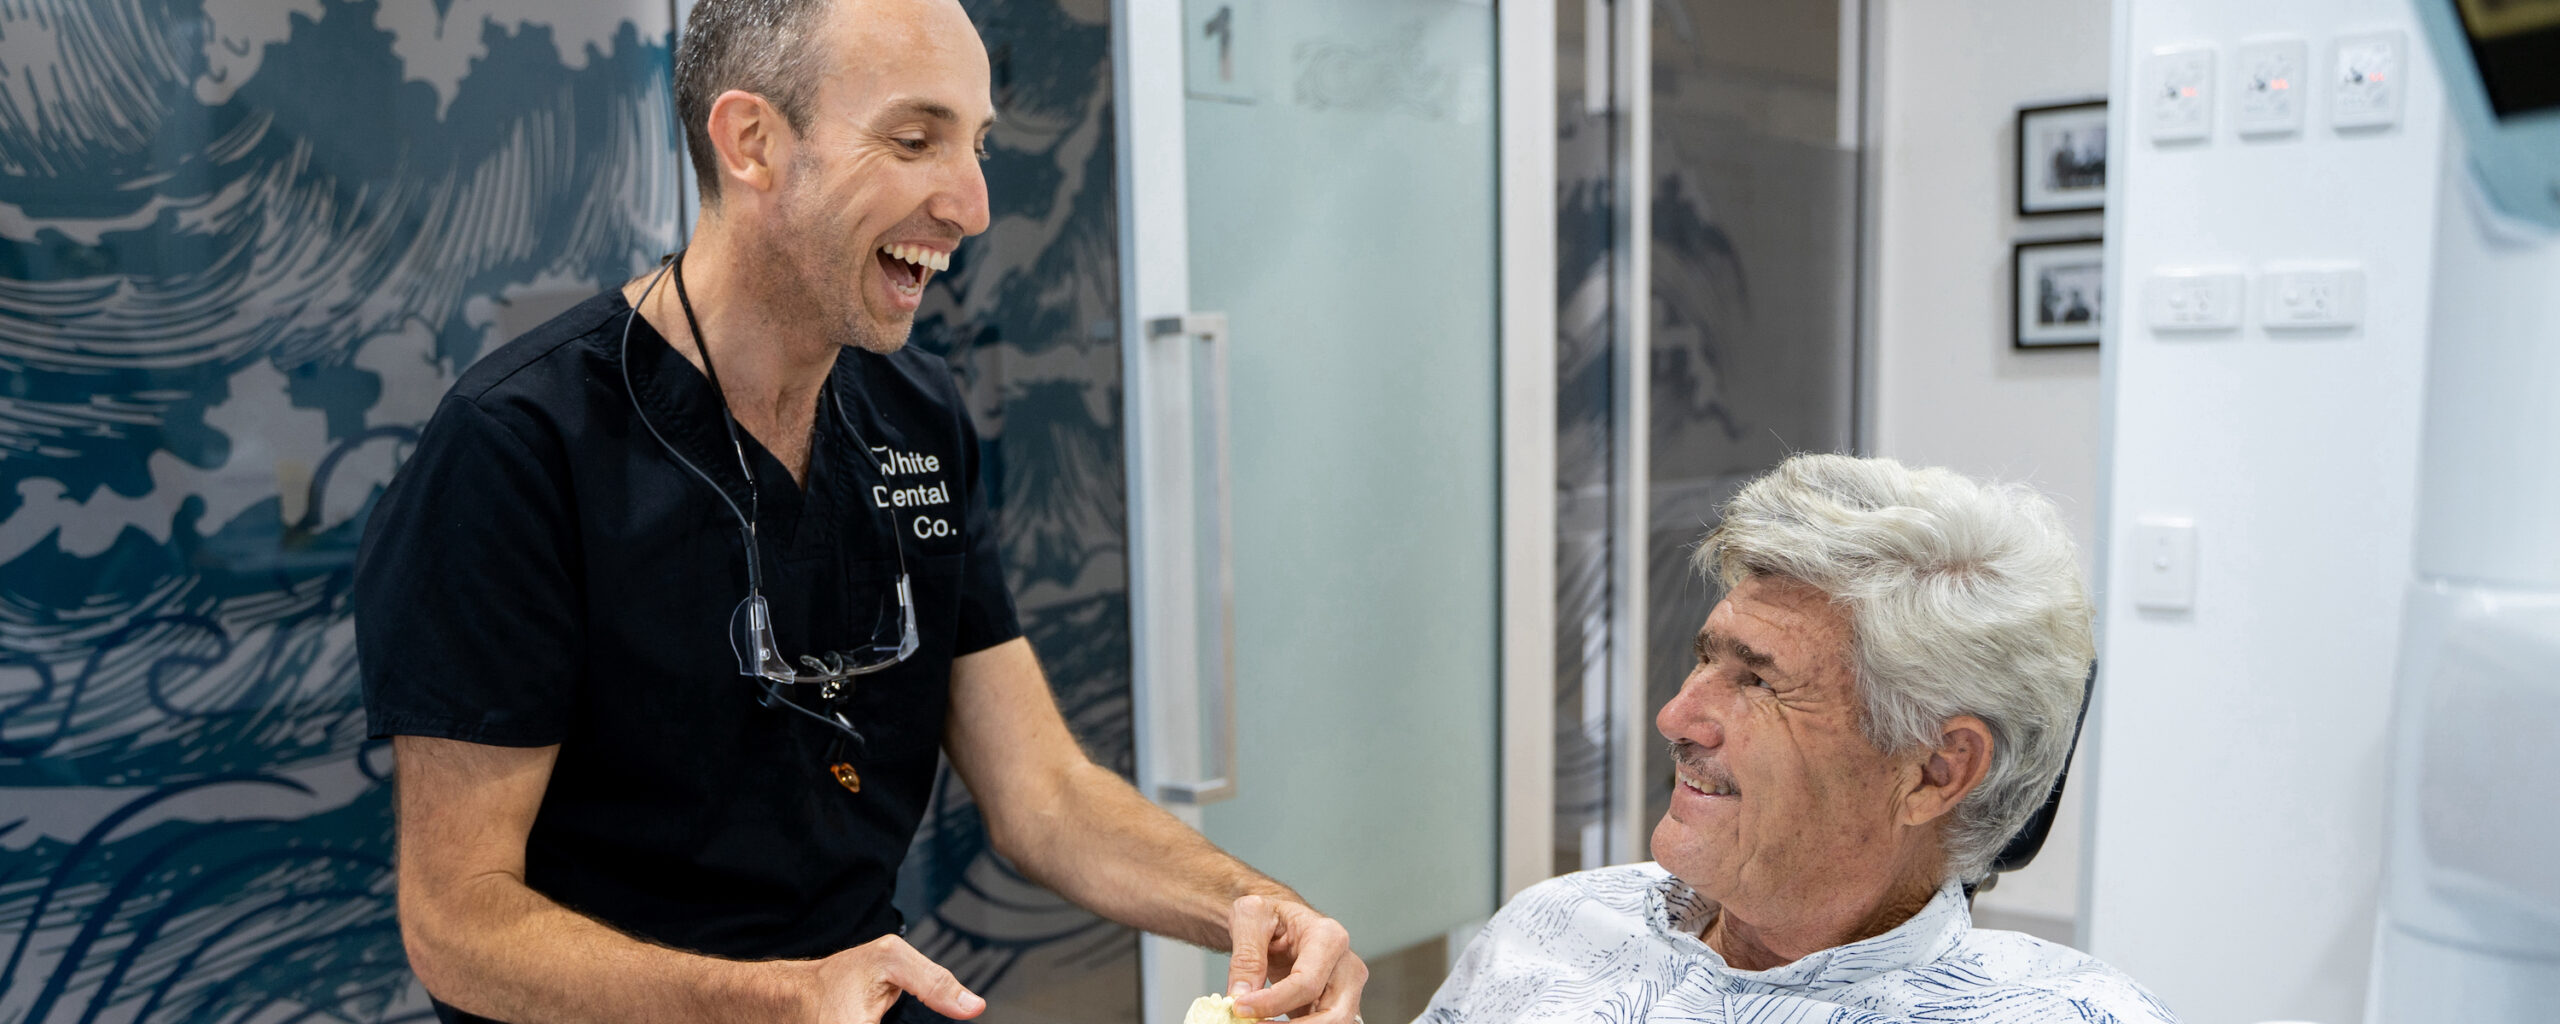 Dr Nick and a patient in the treatment room during an appointment. Both are laughing at a shared joke.